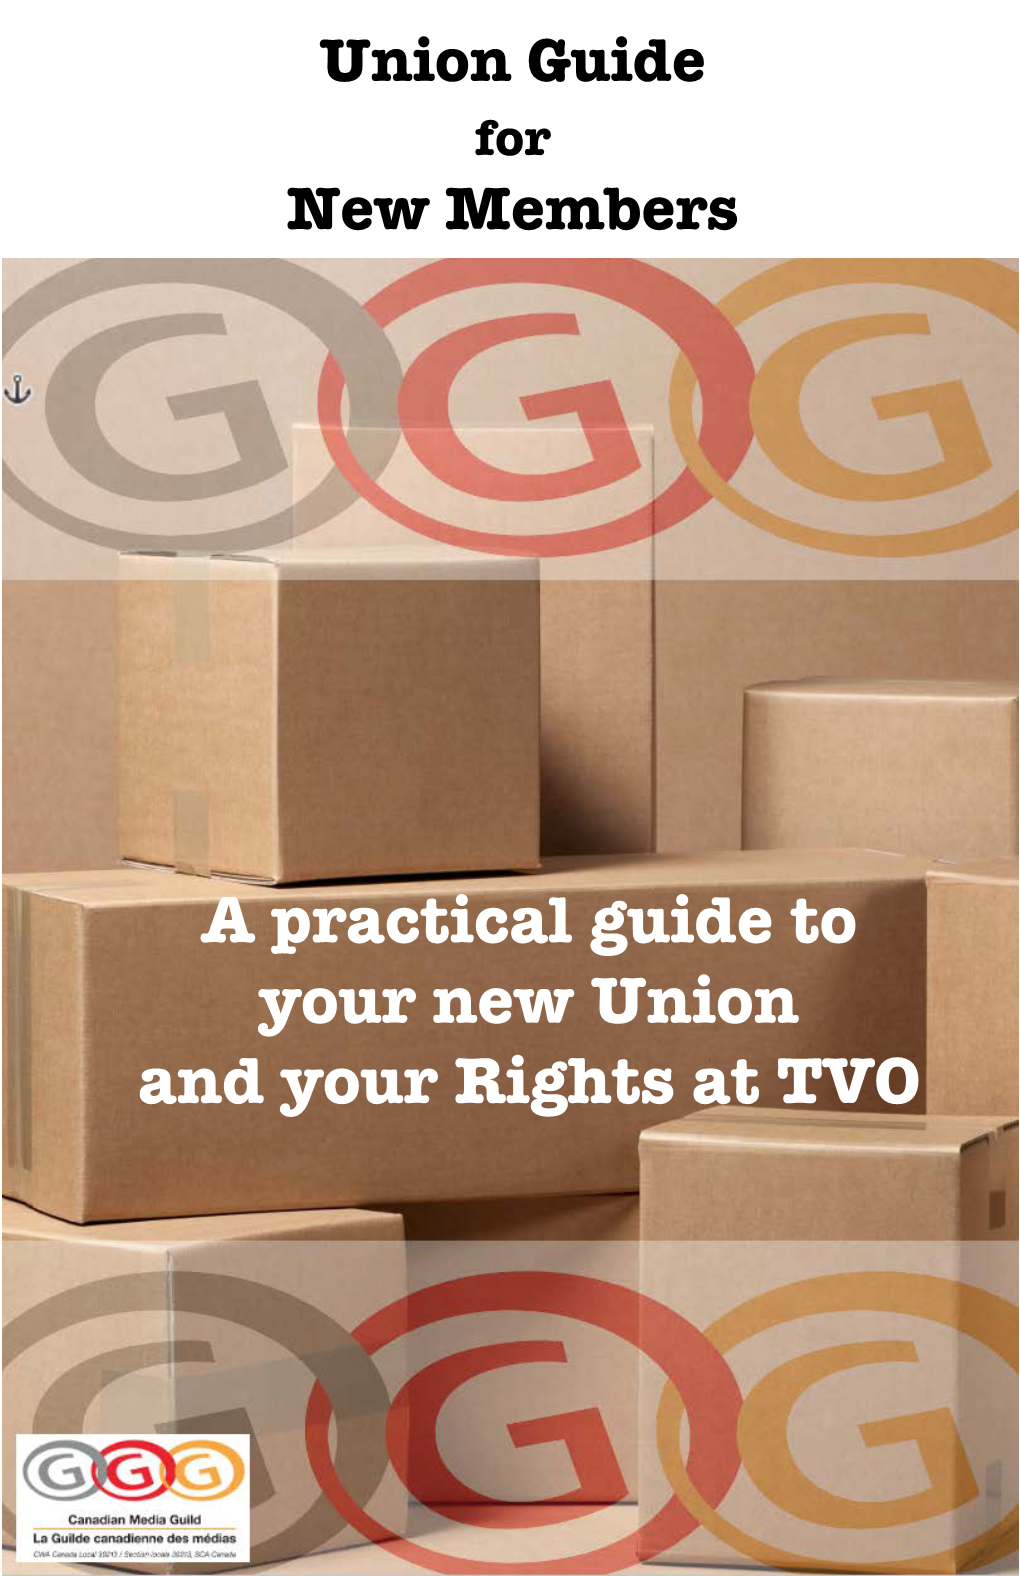 A Practical Guide to Your New Union and Your Rights at TVO 1-800-465-4149 416-591-5333